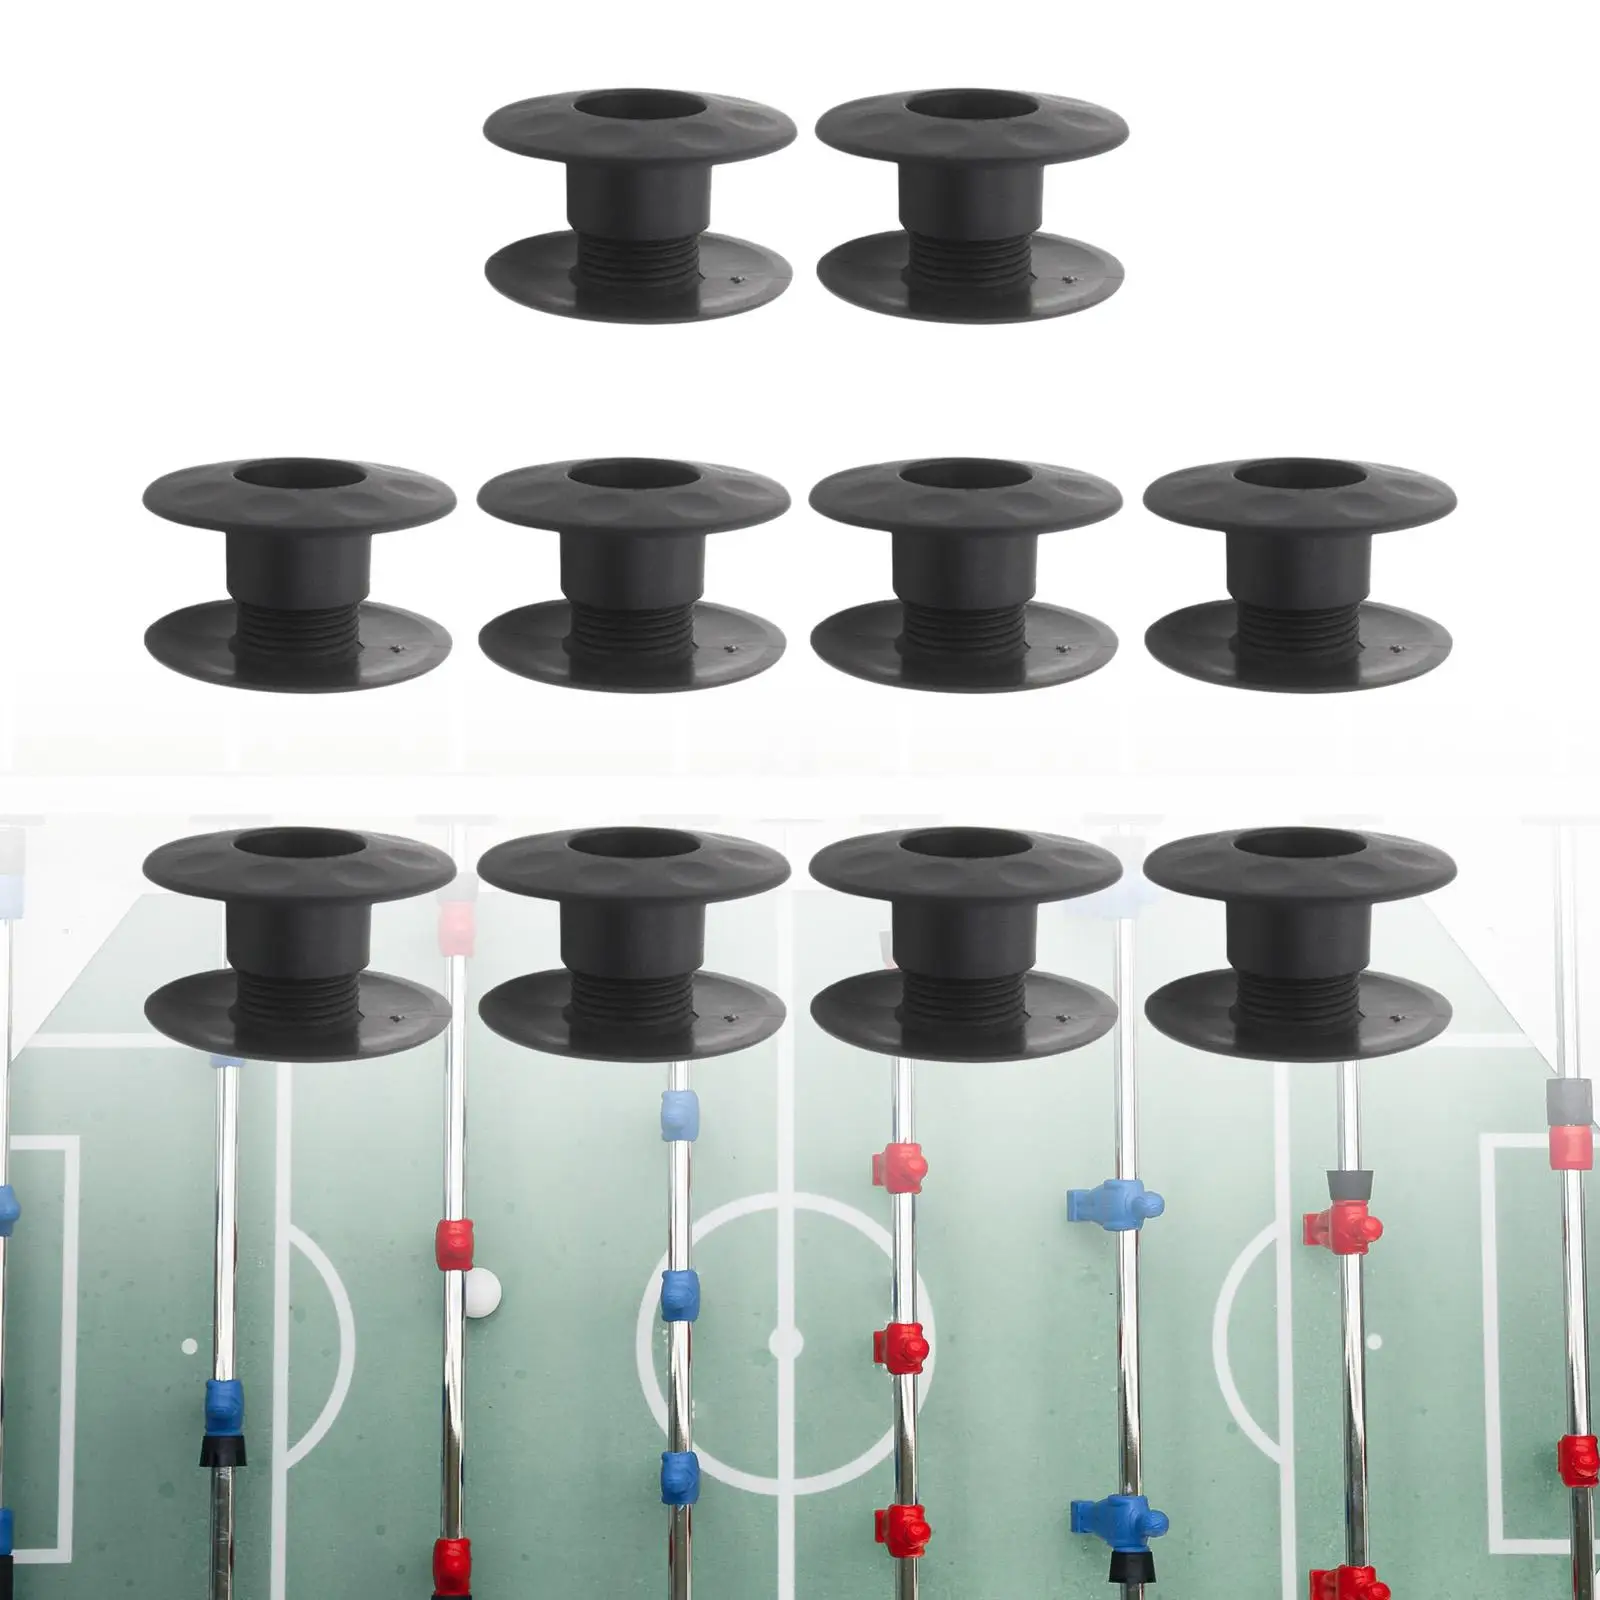 10Pcs Foosball Bearing Rods Foosball Table Parts Replacement Fun Games Accessories